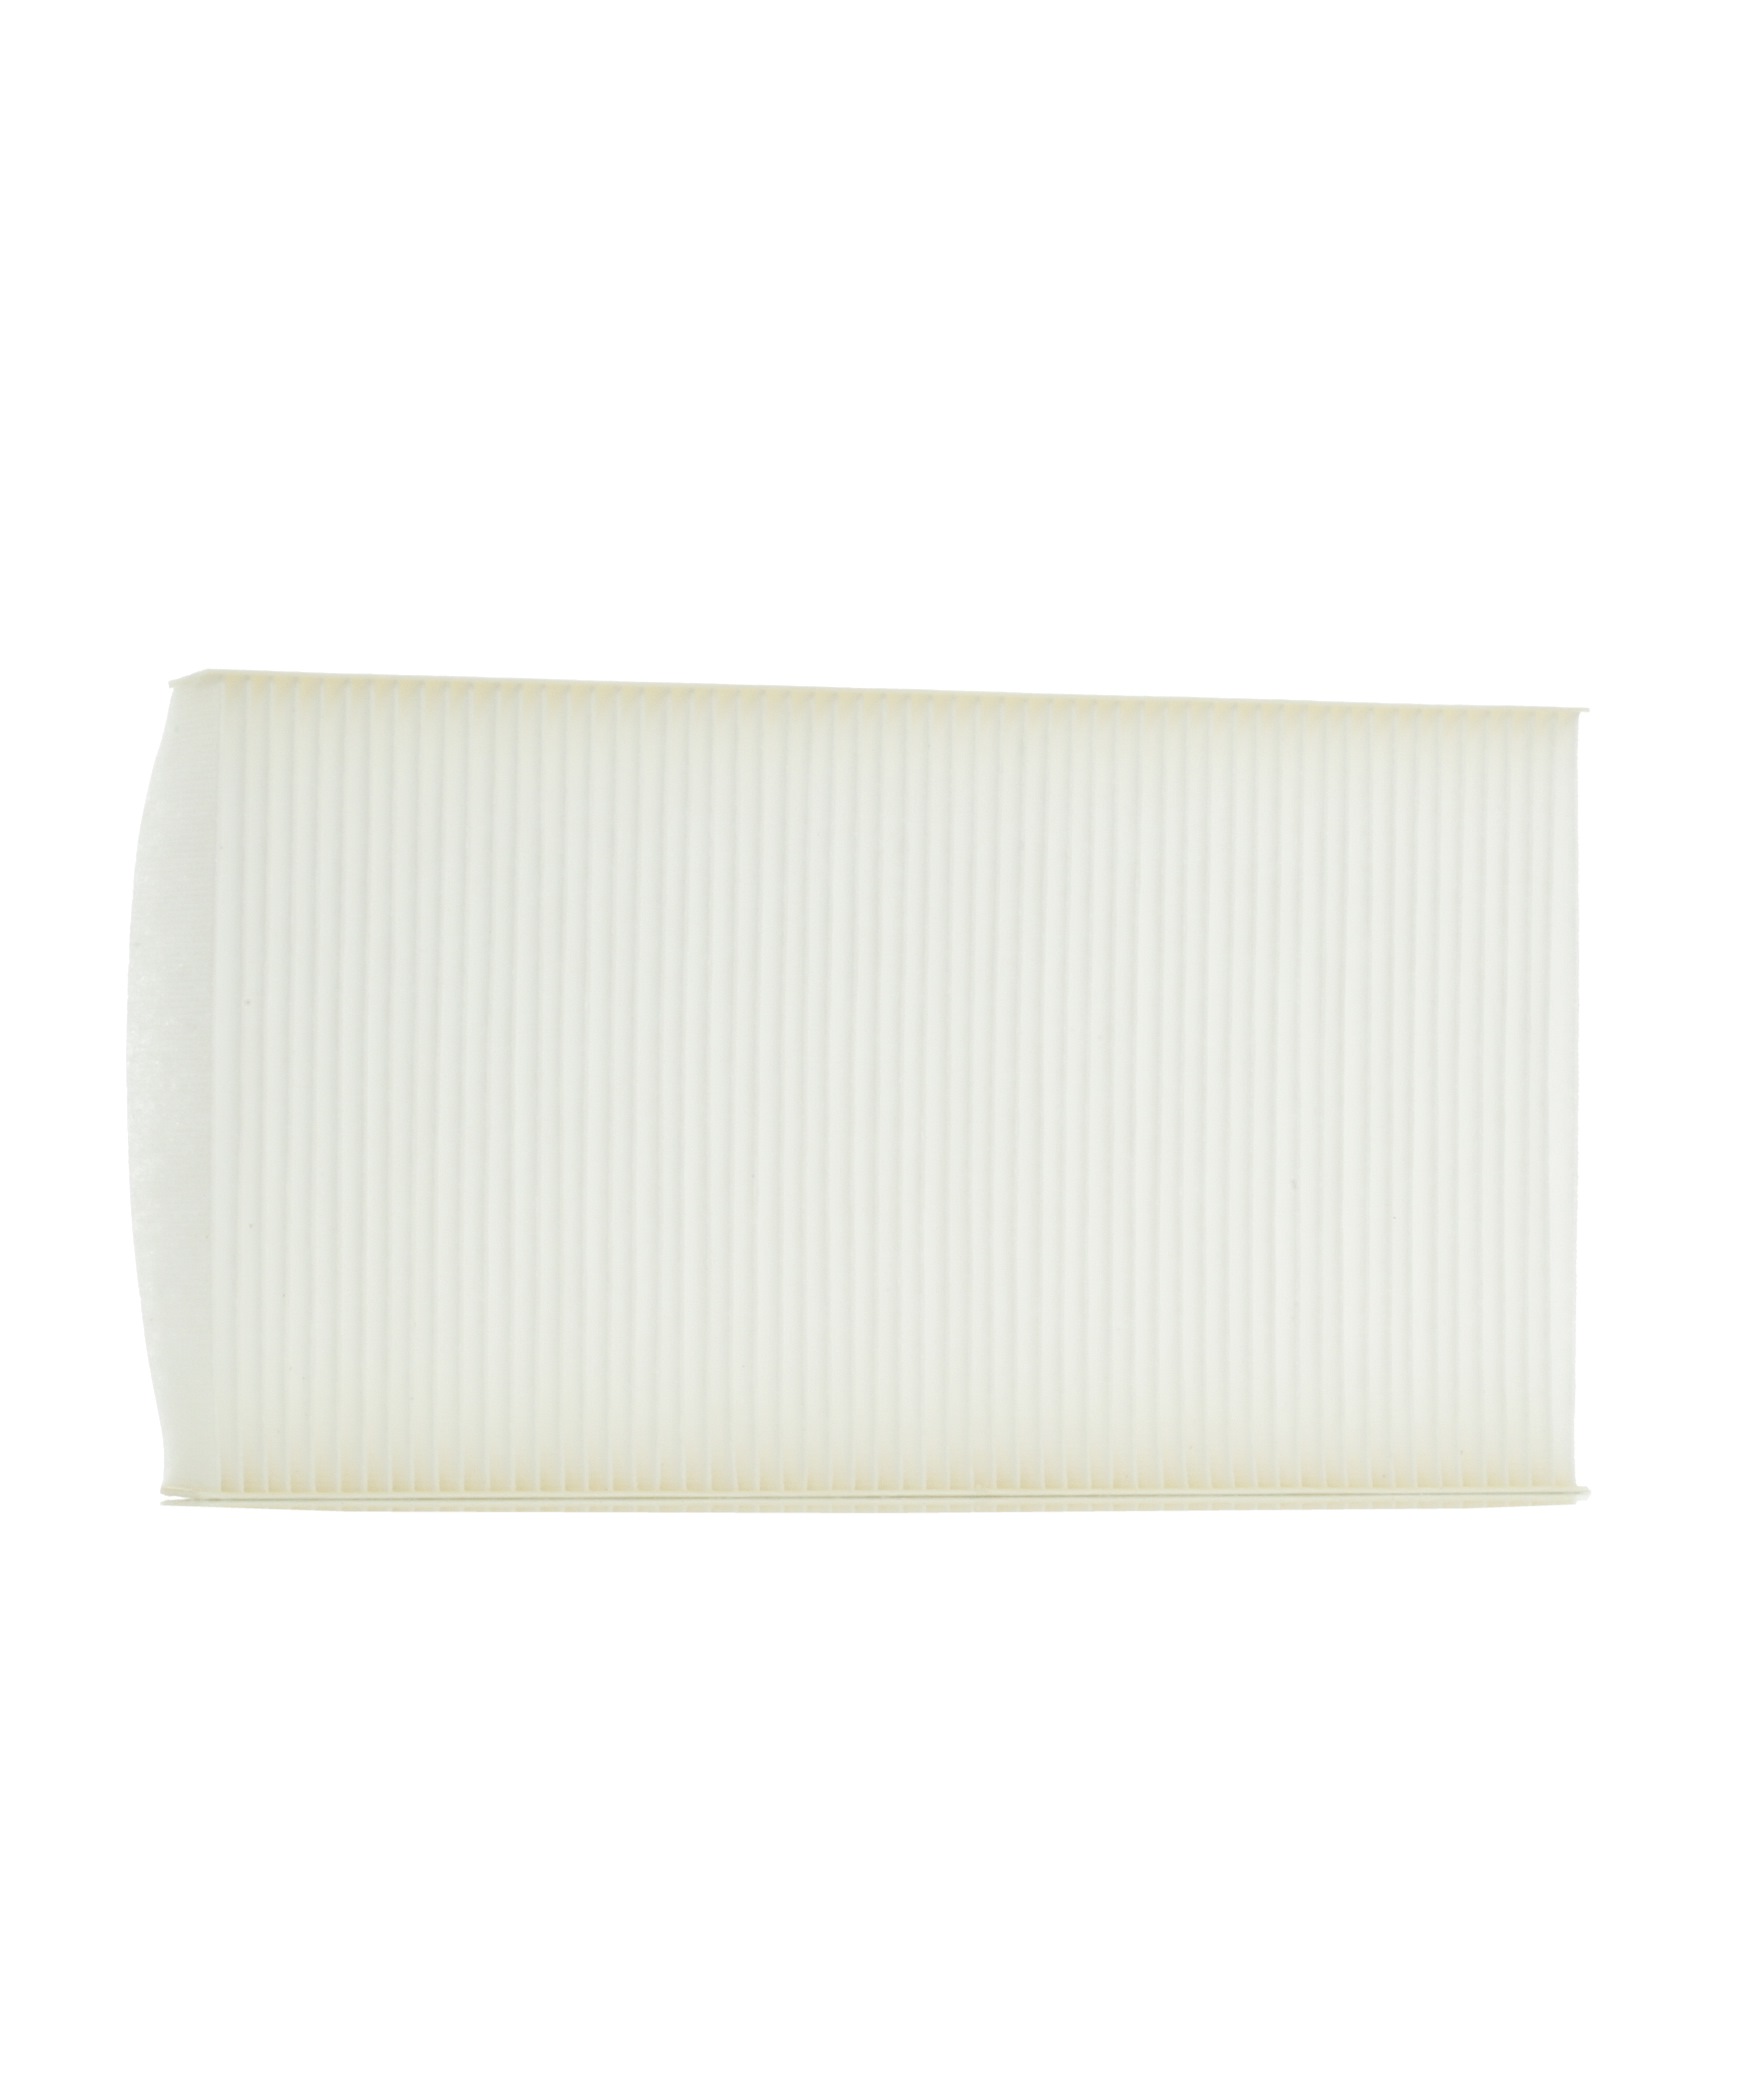 698197 VALEO Pollen filter IVECO Particulate Filter, 288 mm x 160 mm x 30 mm